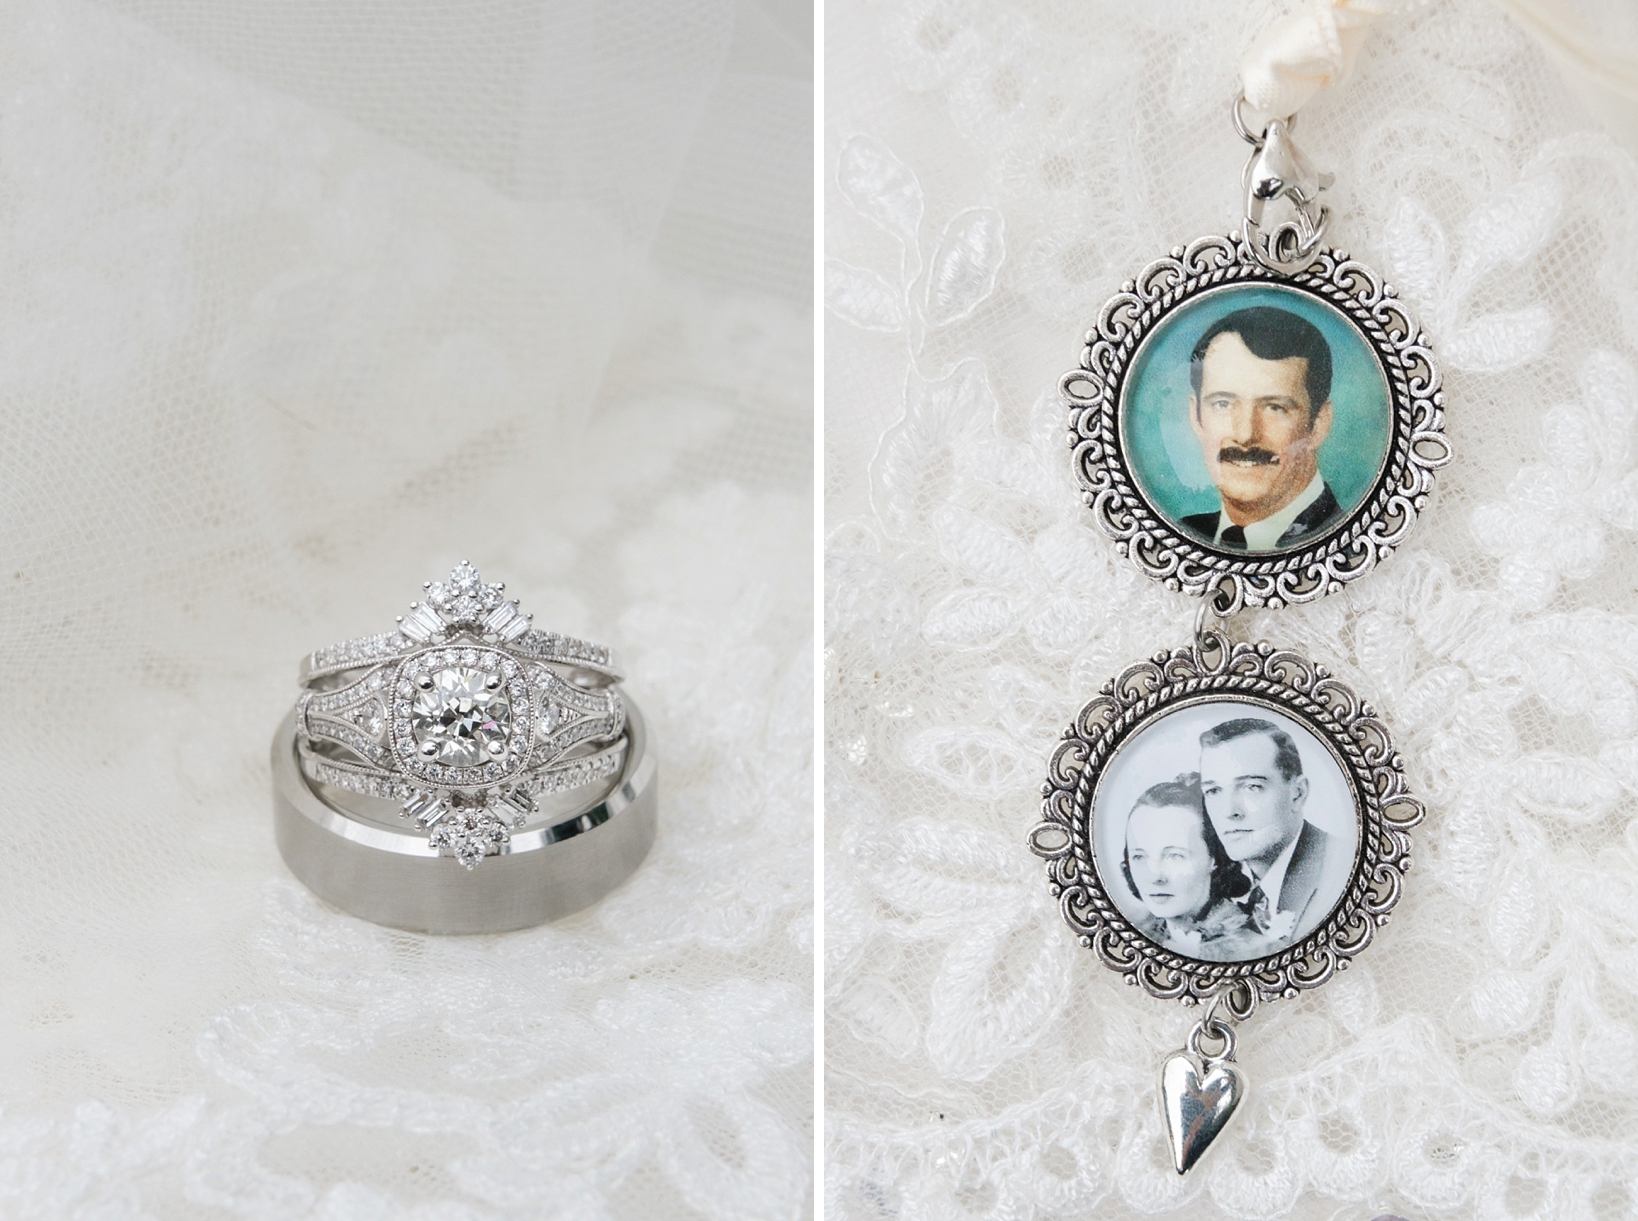 Wedding bands and family locket Bridal details against the white lace of her wedding dress